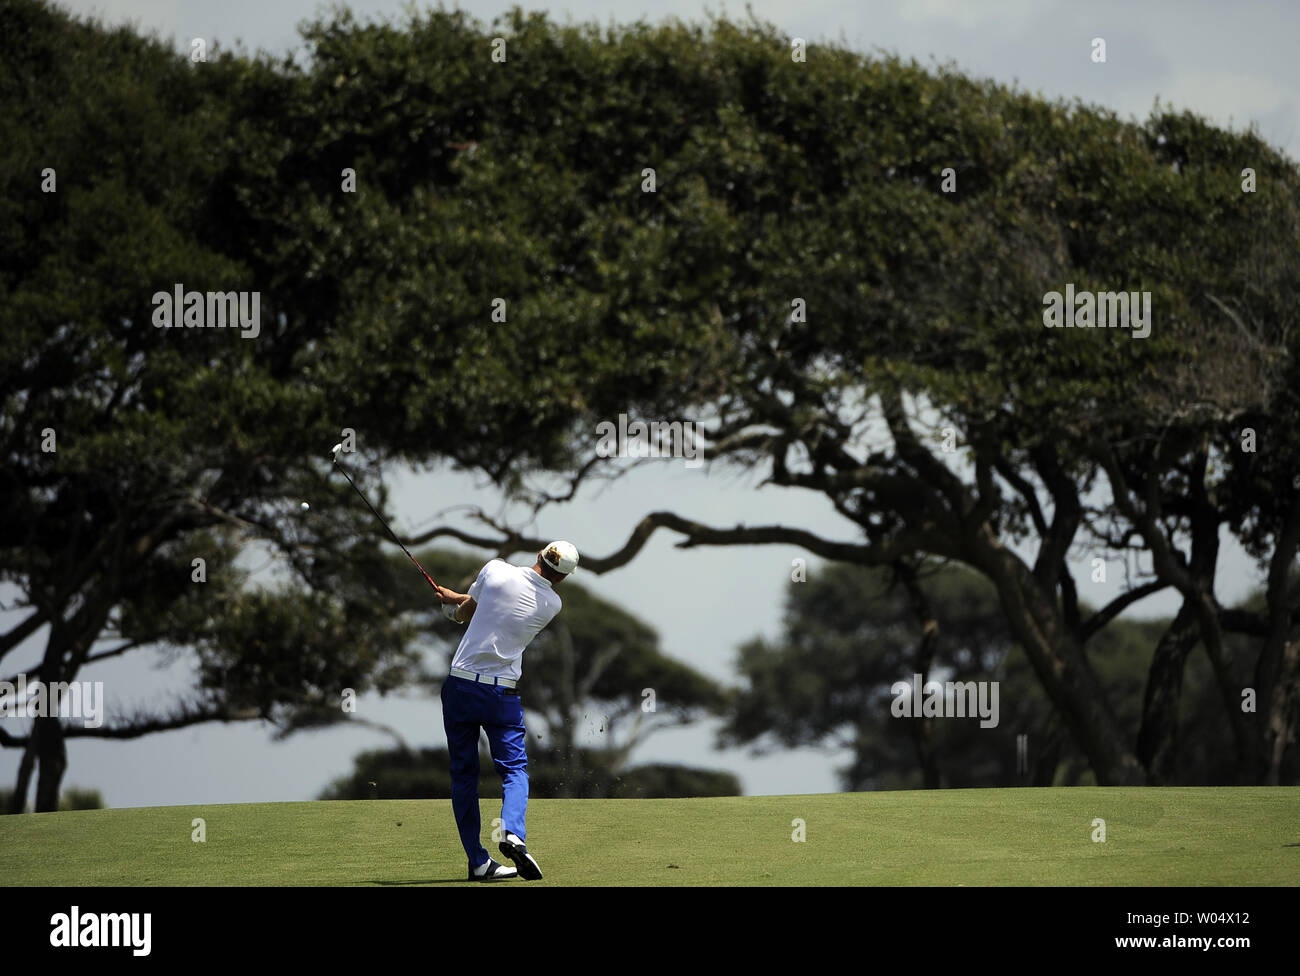 Marcel Siem of Germany uses a fairway wood on his stroke near trees at hole two during the third round of the PGA Championship on August 11, 2012 at the Ocean Course in Kiawah Island, South, Carolina.  UPI/David Tulis Stock Photo